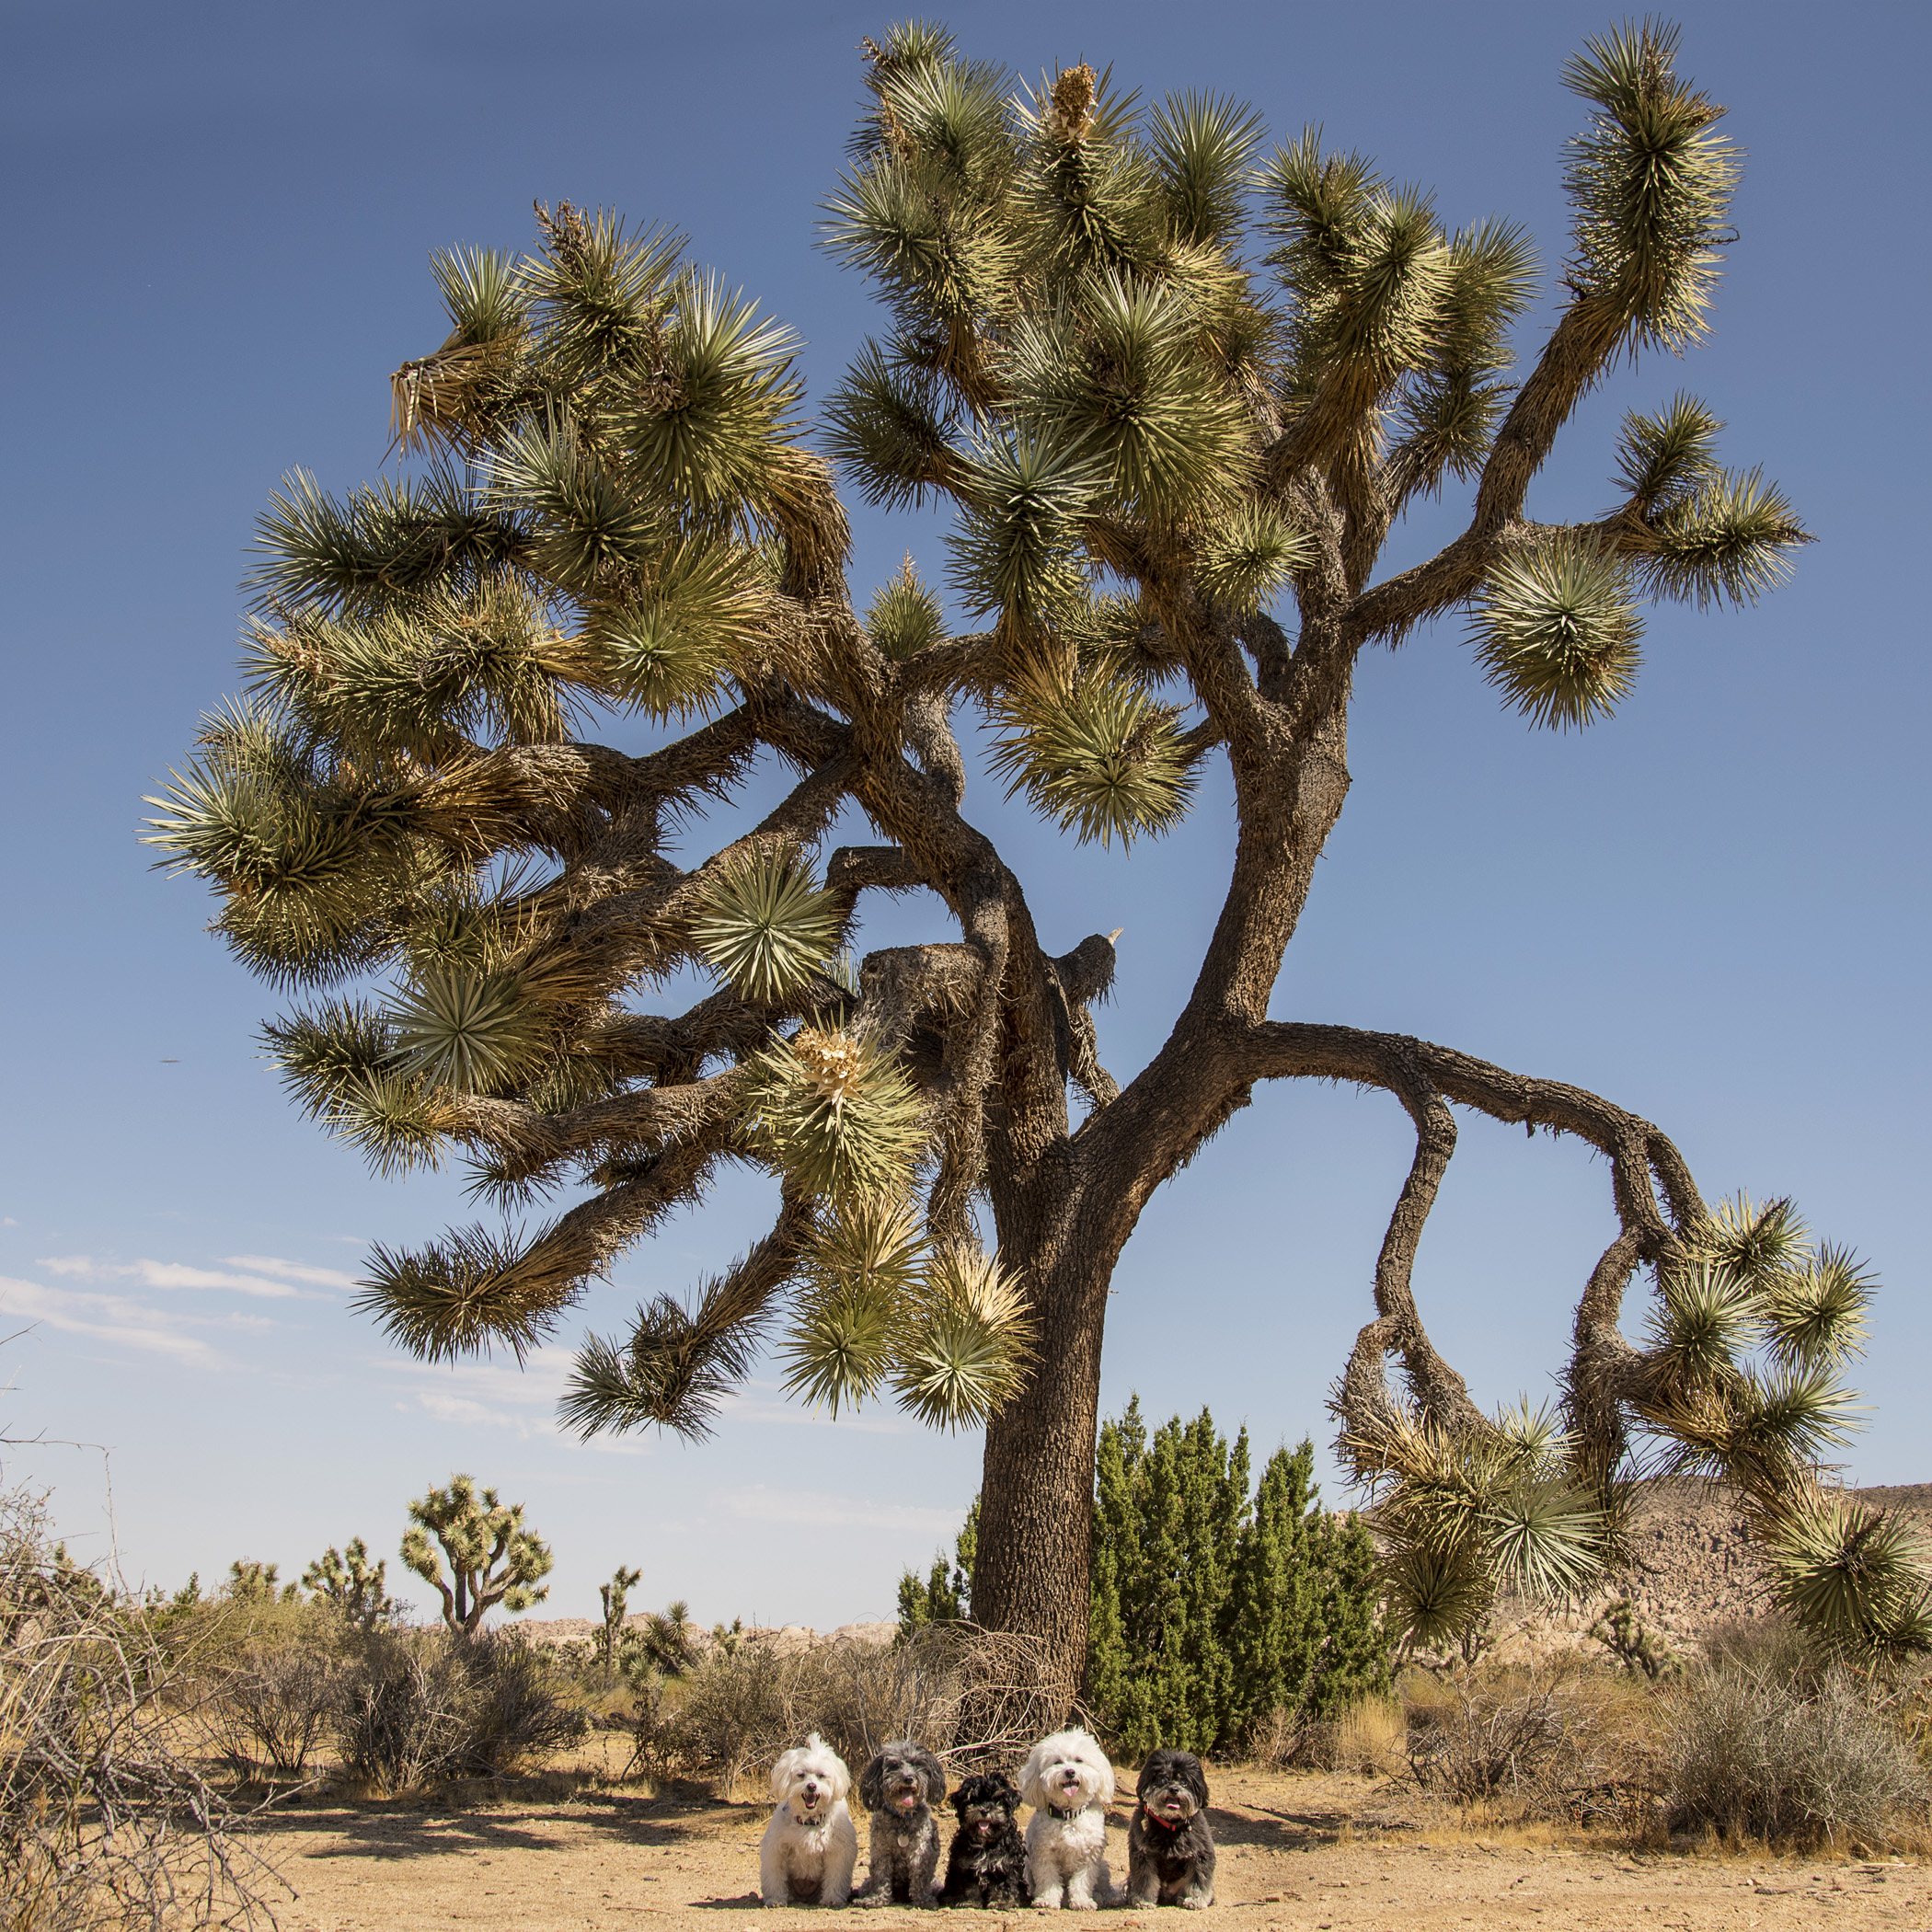  There is no better detour on the way to the beach, than a drive through Joshua Tree National Park 